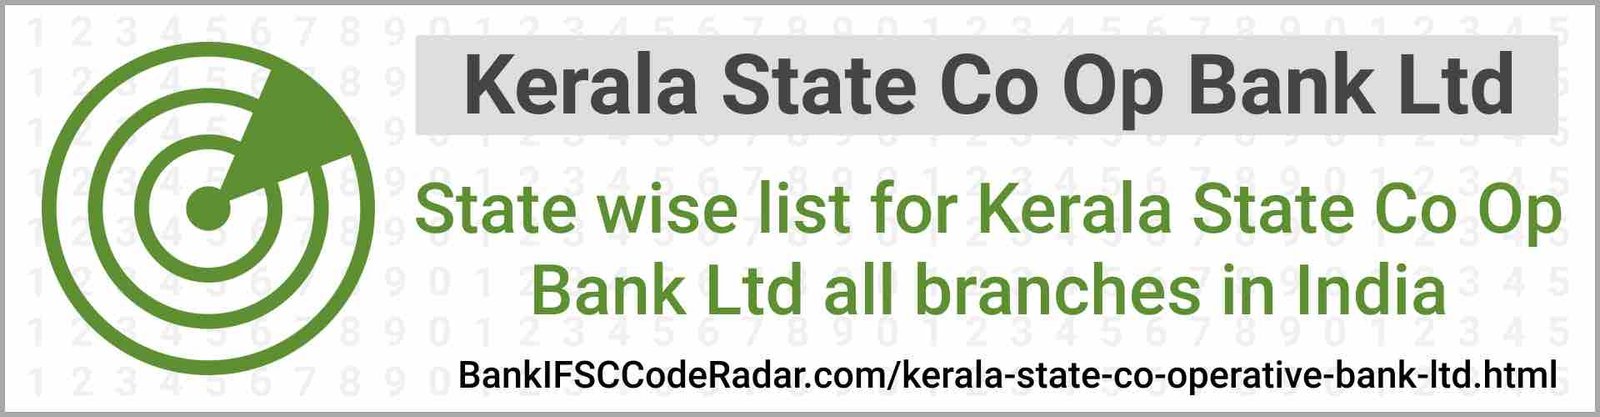 Kerala State Co Operative Bank Ltd All Branches India